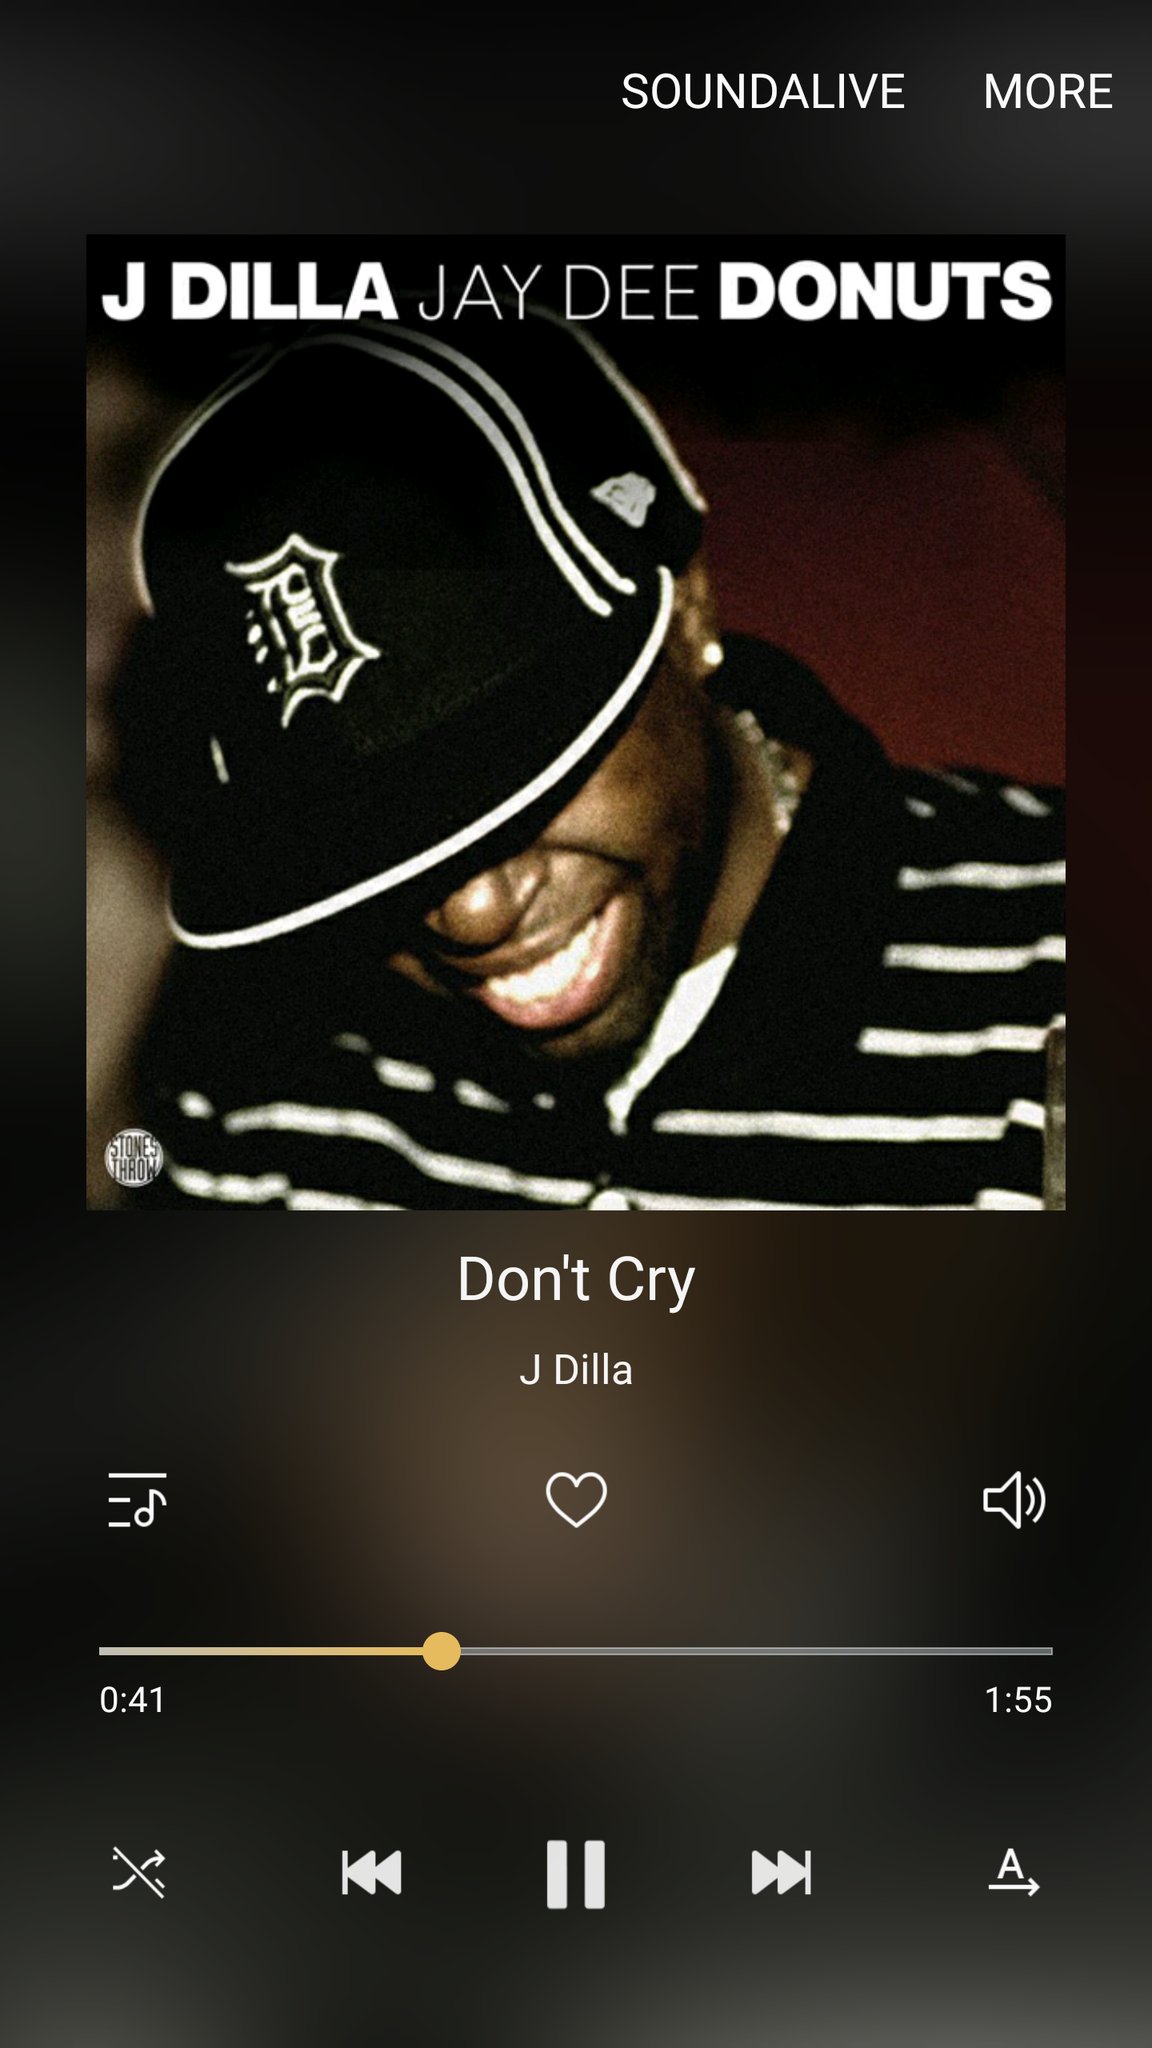 Happy birthday to the late great J Dilla! RIP to the GOAT 